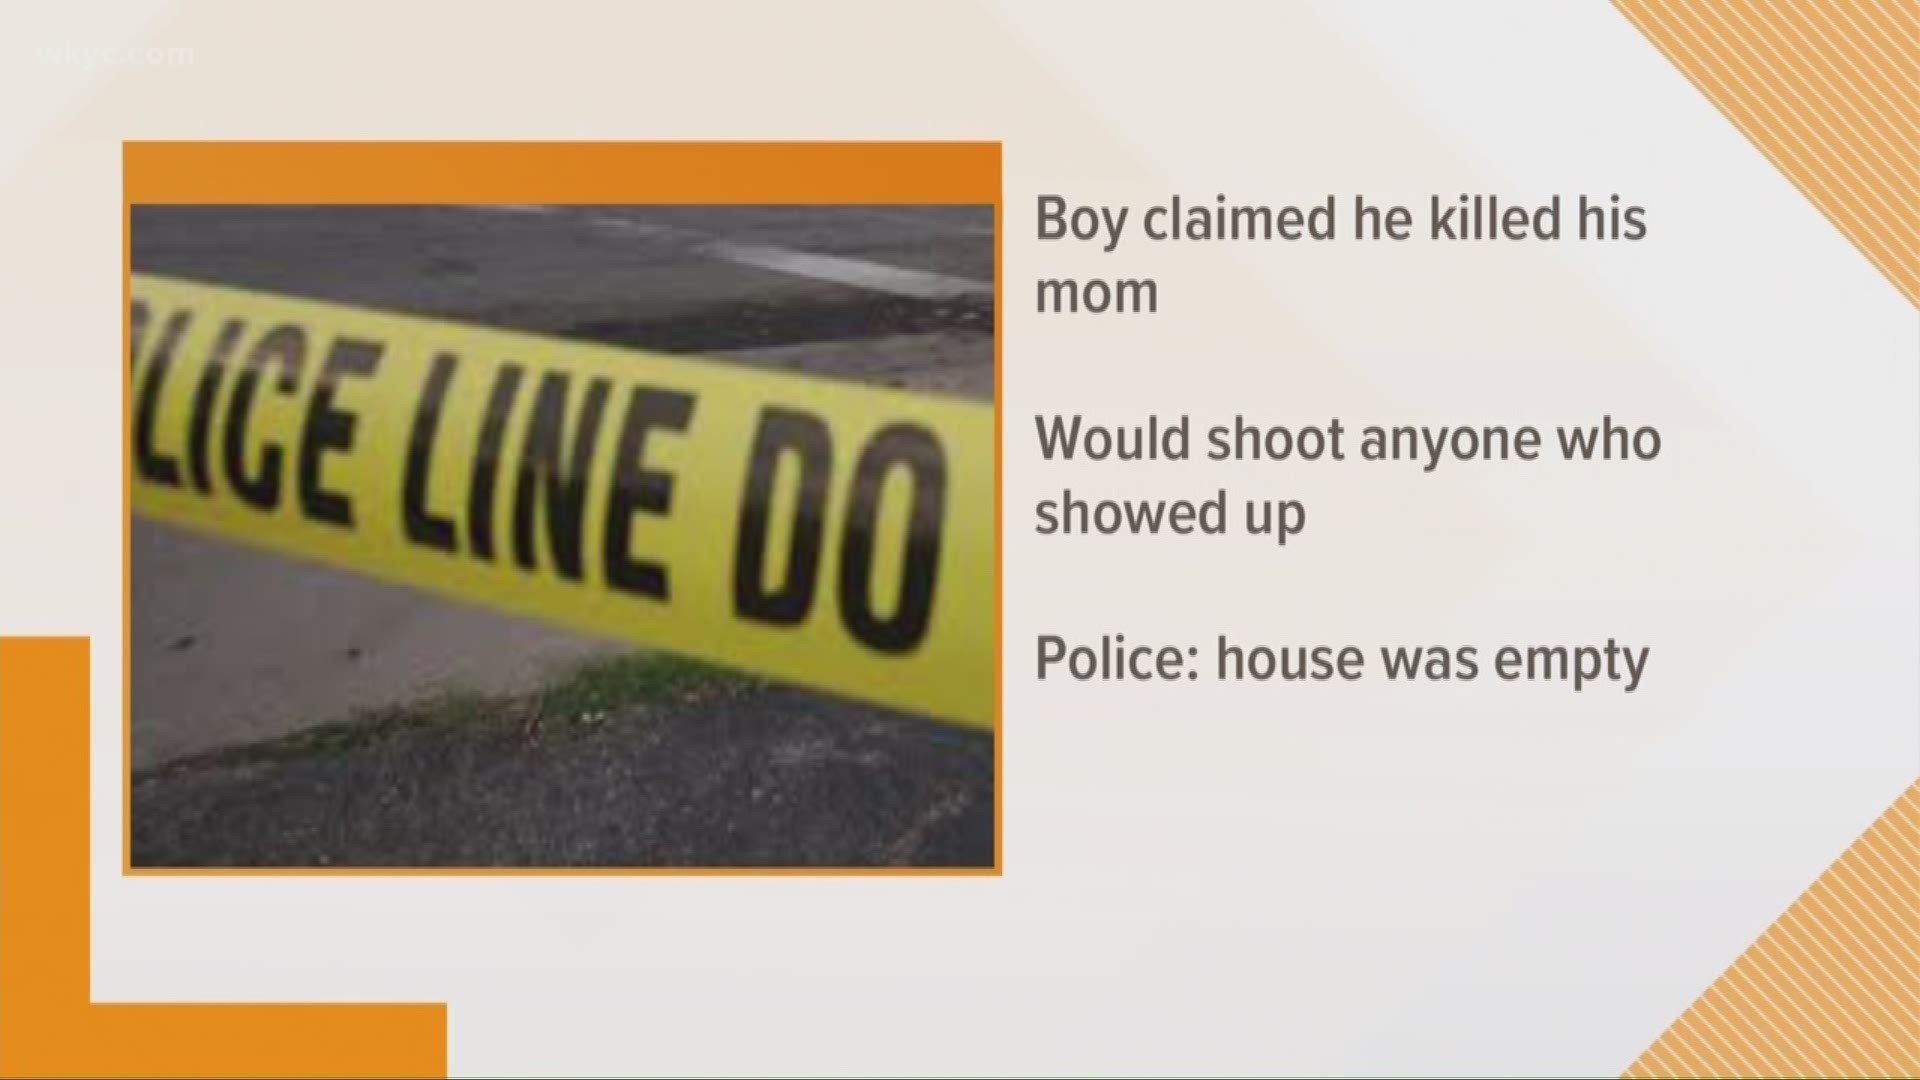 Police are investigating after they received a call from a boy who claimed he shot his mother.